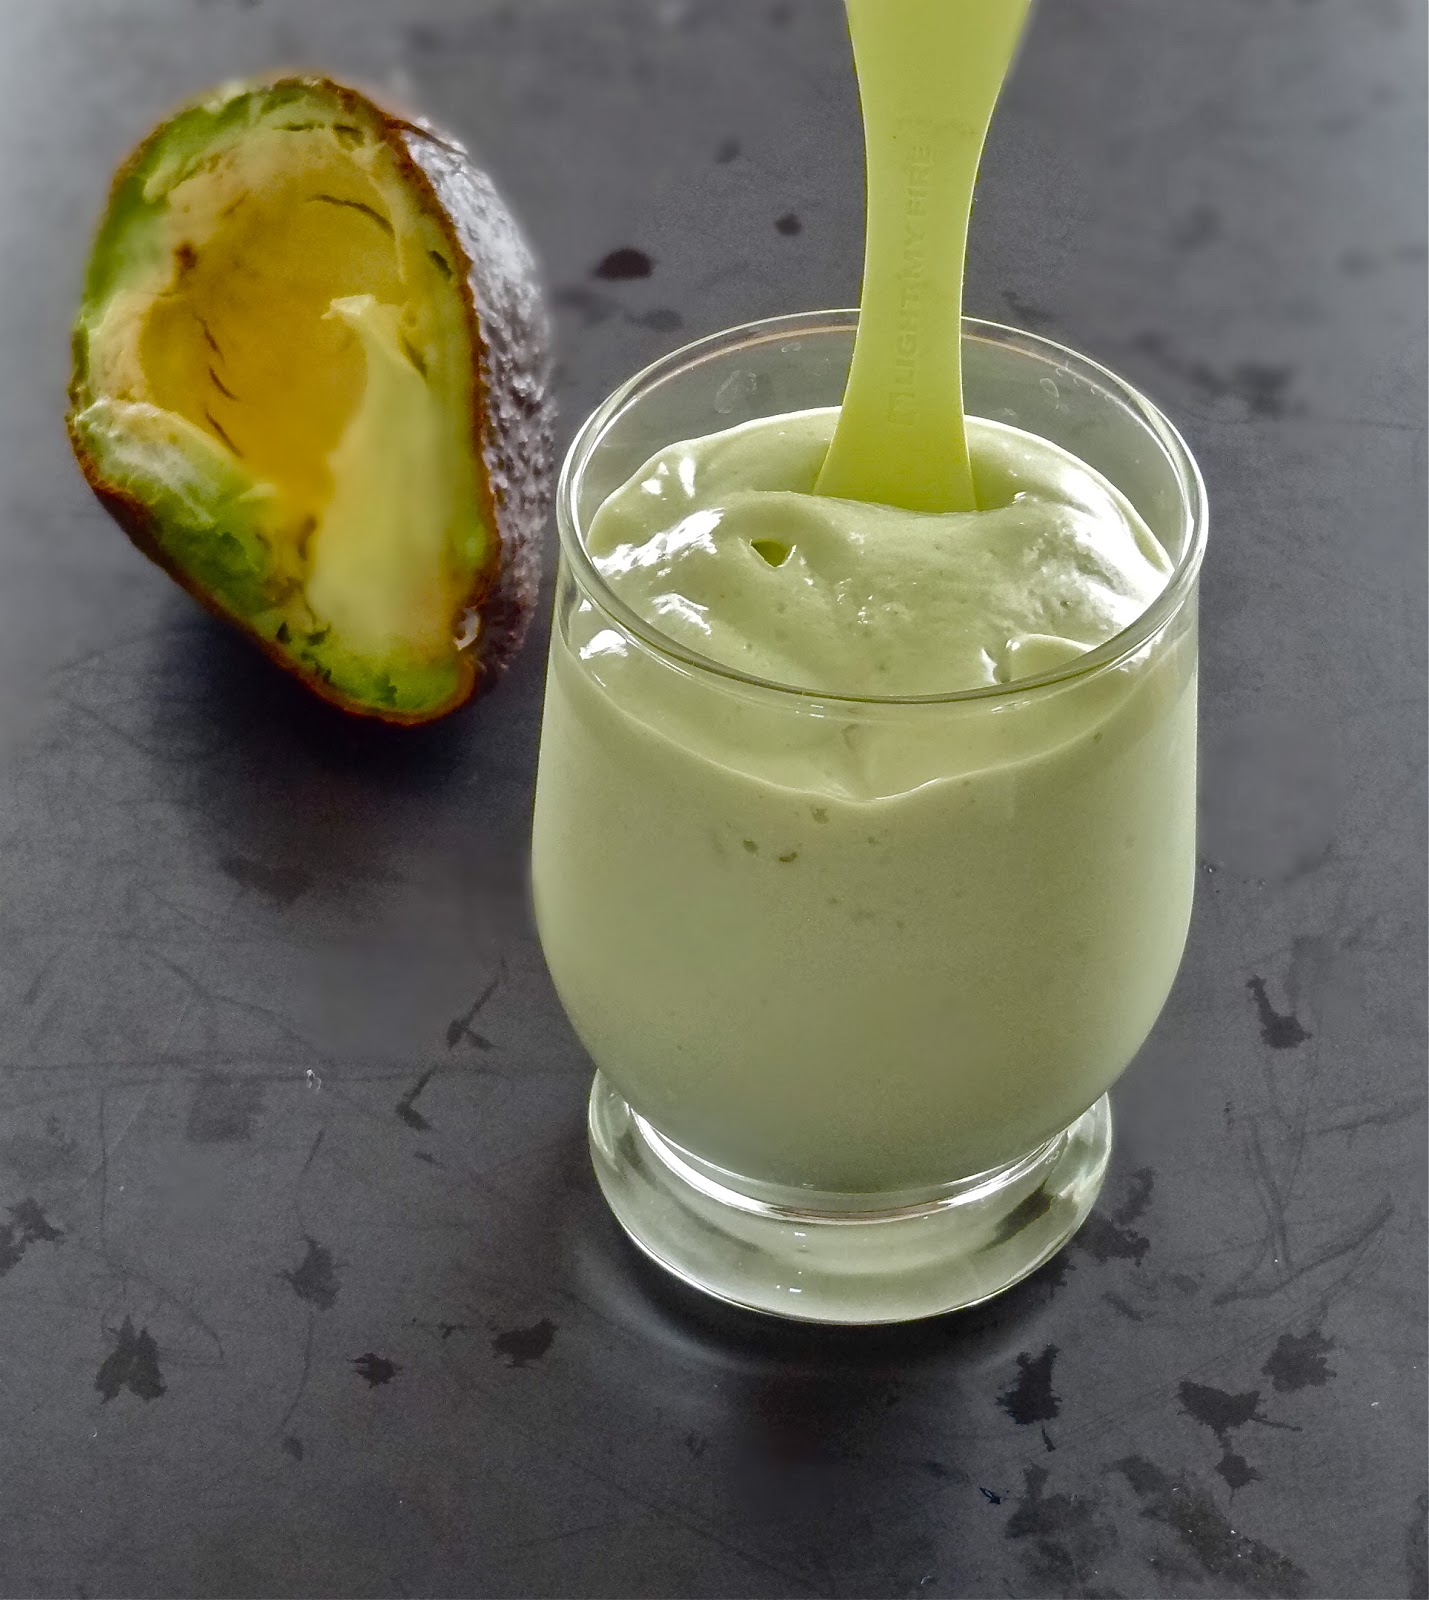 At Home How To Make Avocado Juice In Miri City